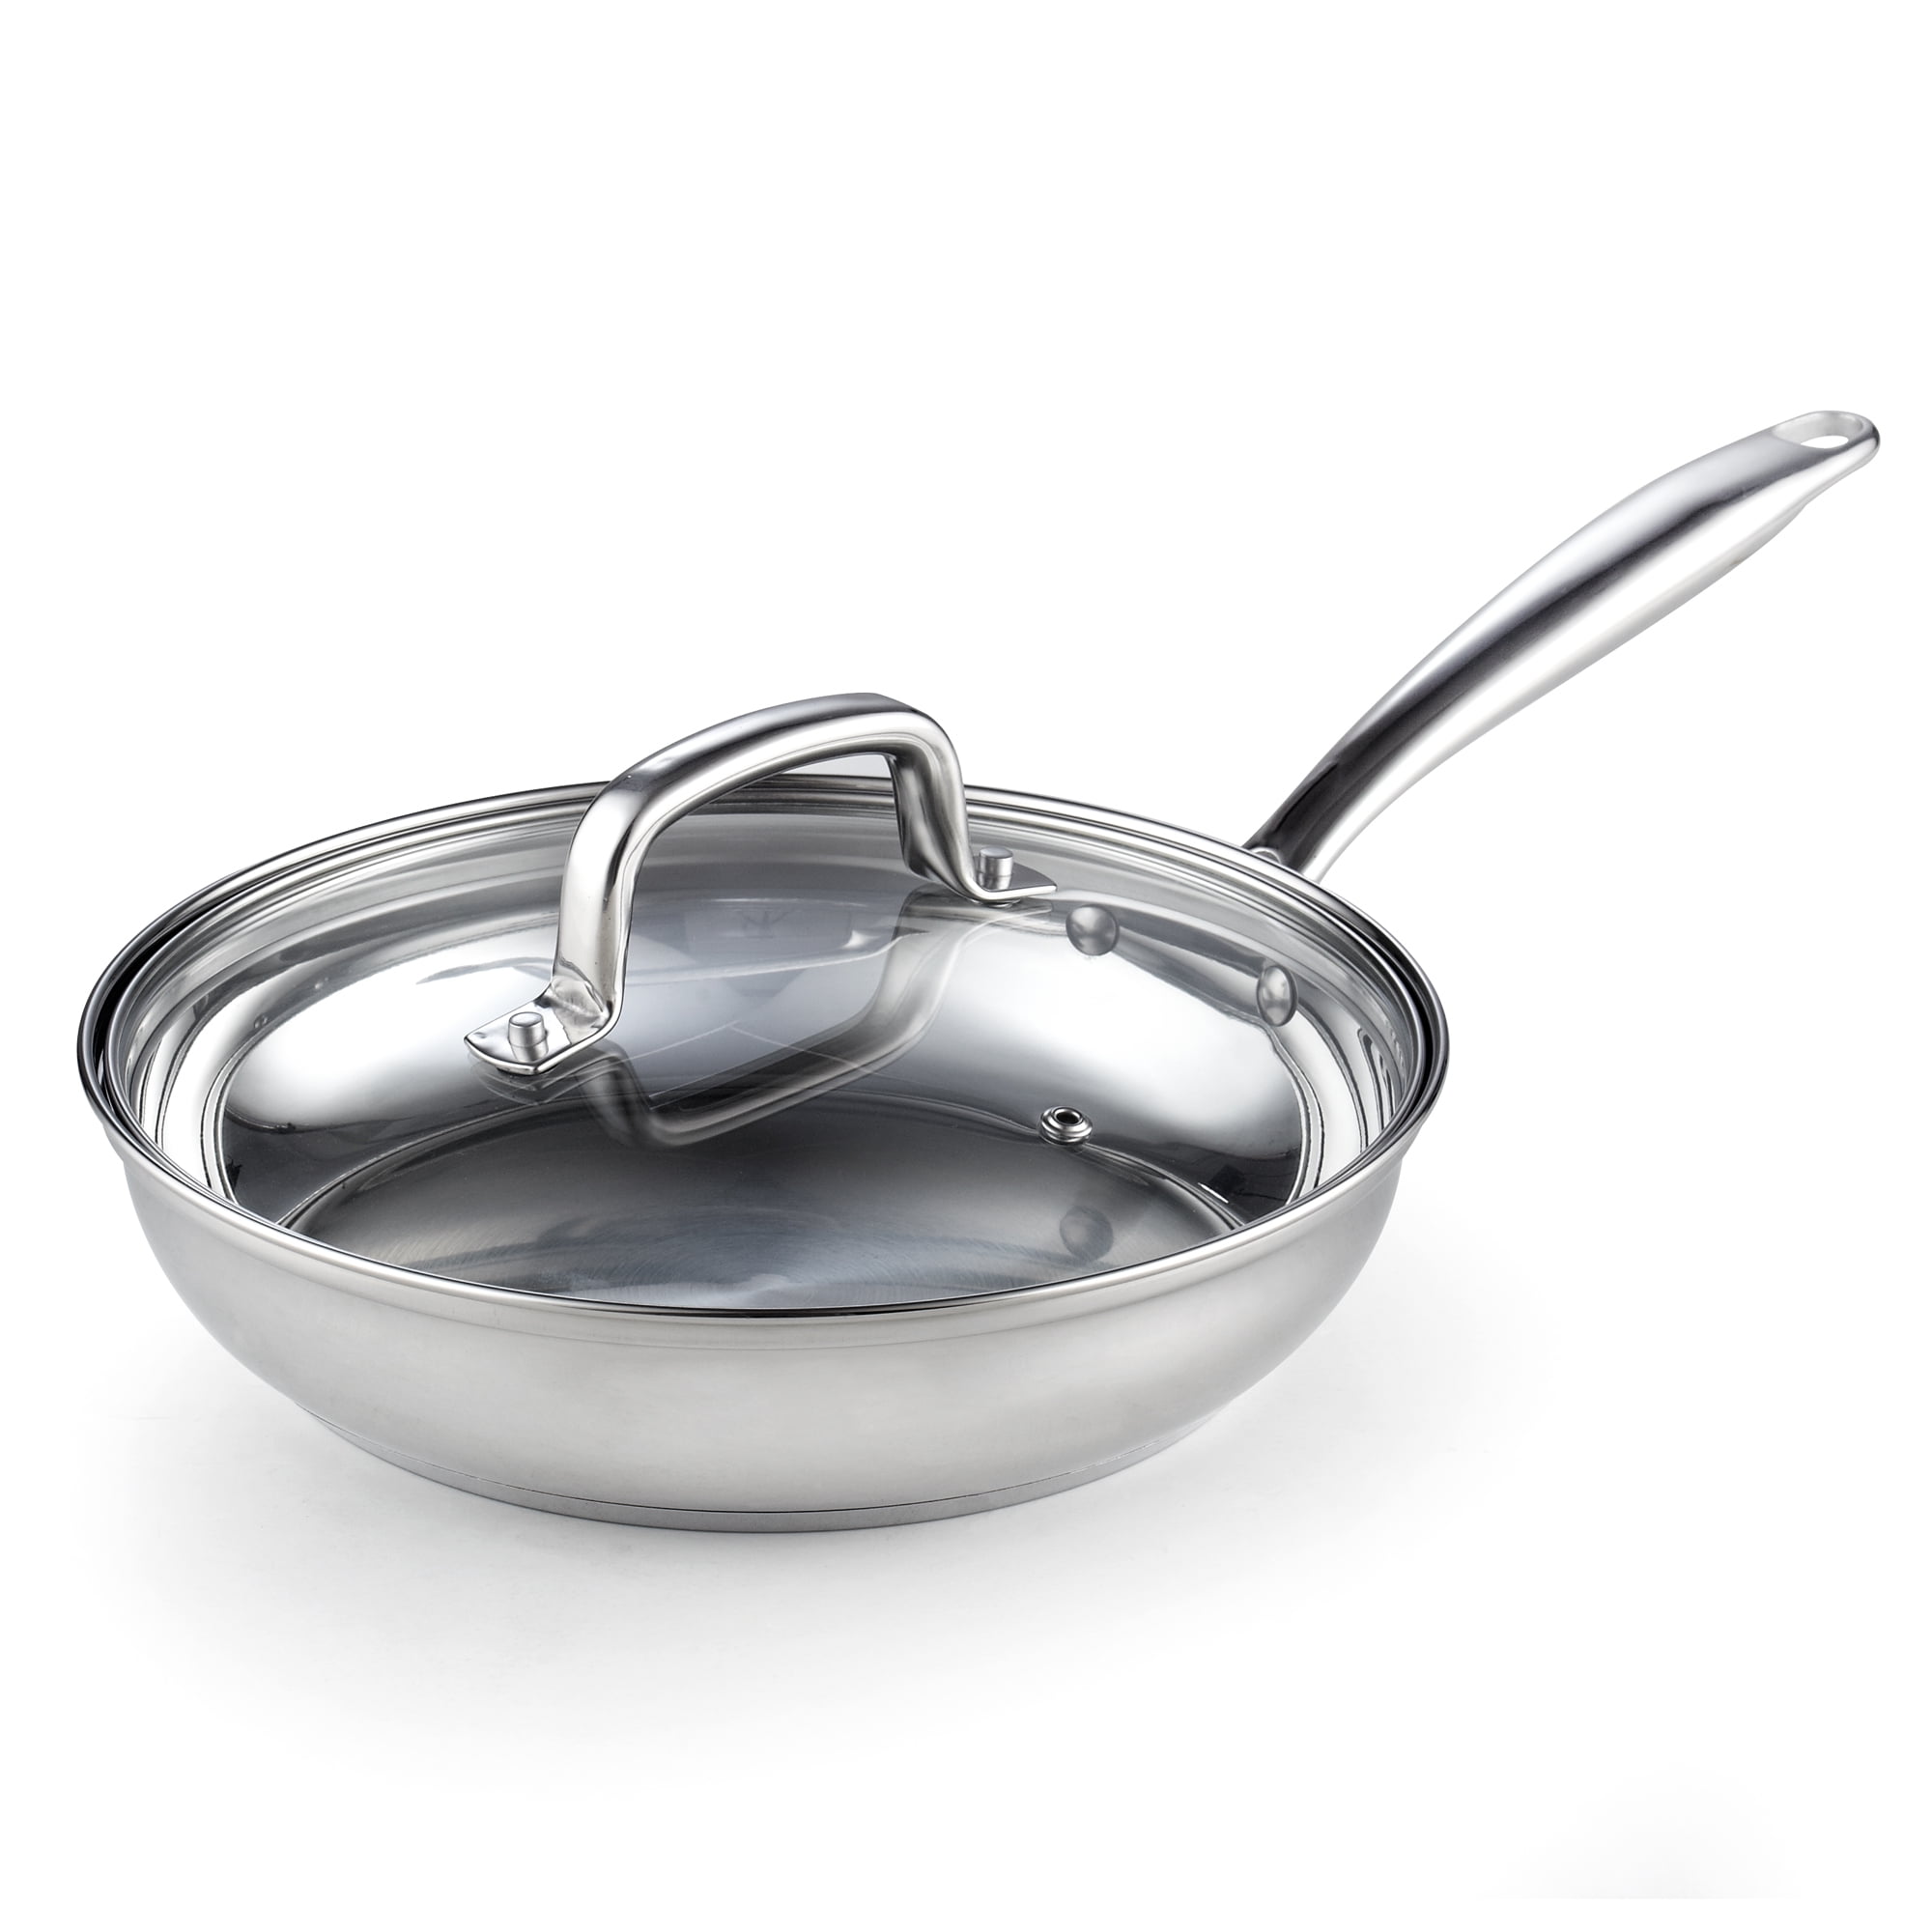 Cooks Standard Multi-Ply Clad 10.5 Deep Saute Pan with Lid, Stainless Steel, 4 qt